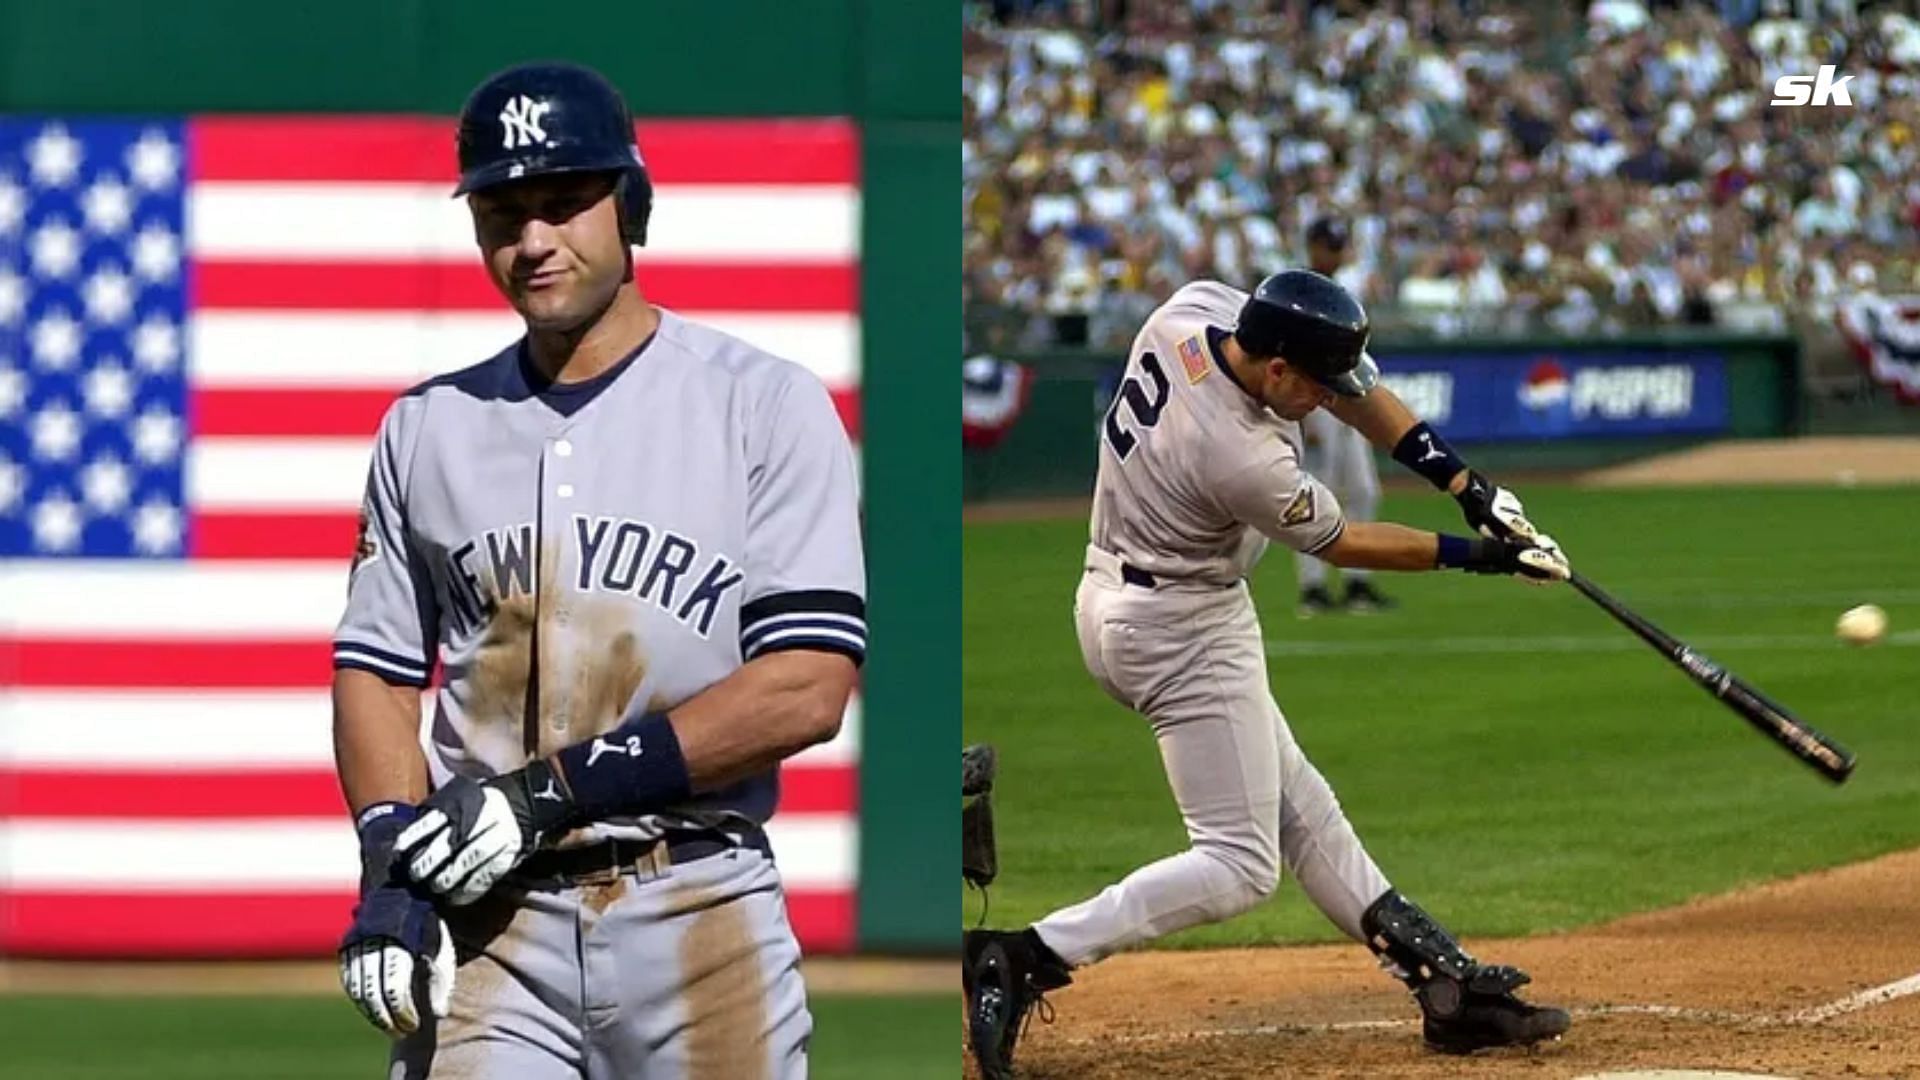 Which team did Derek Jeter get the most hits against in his career? Exploring the iconic Yankees